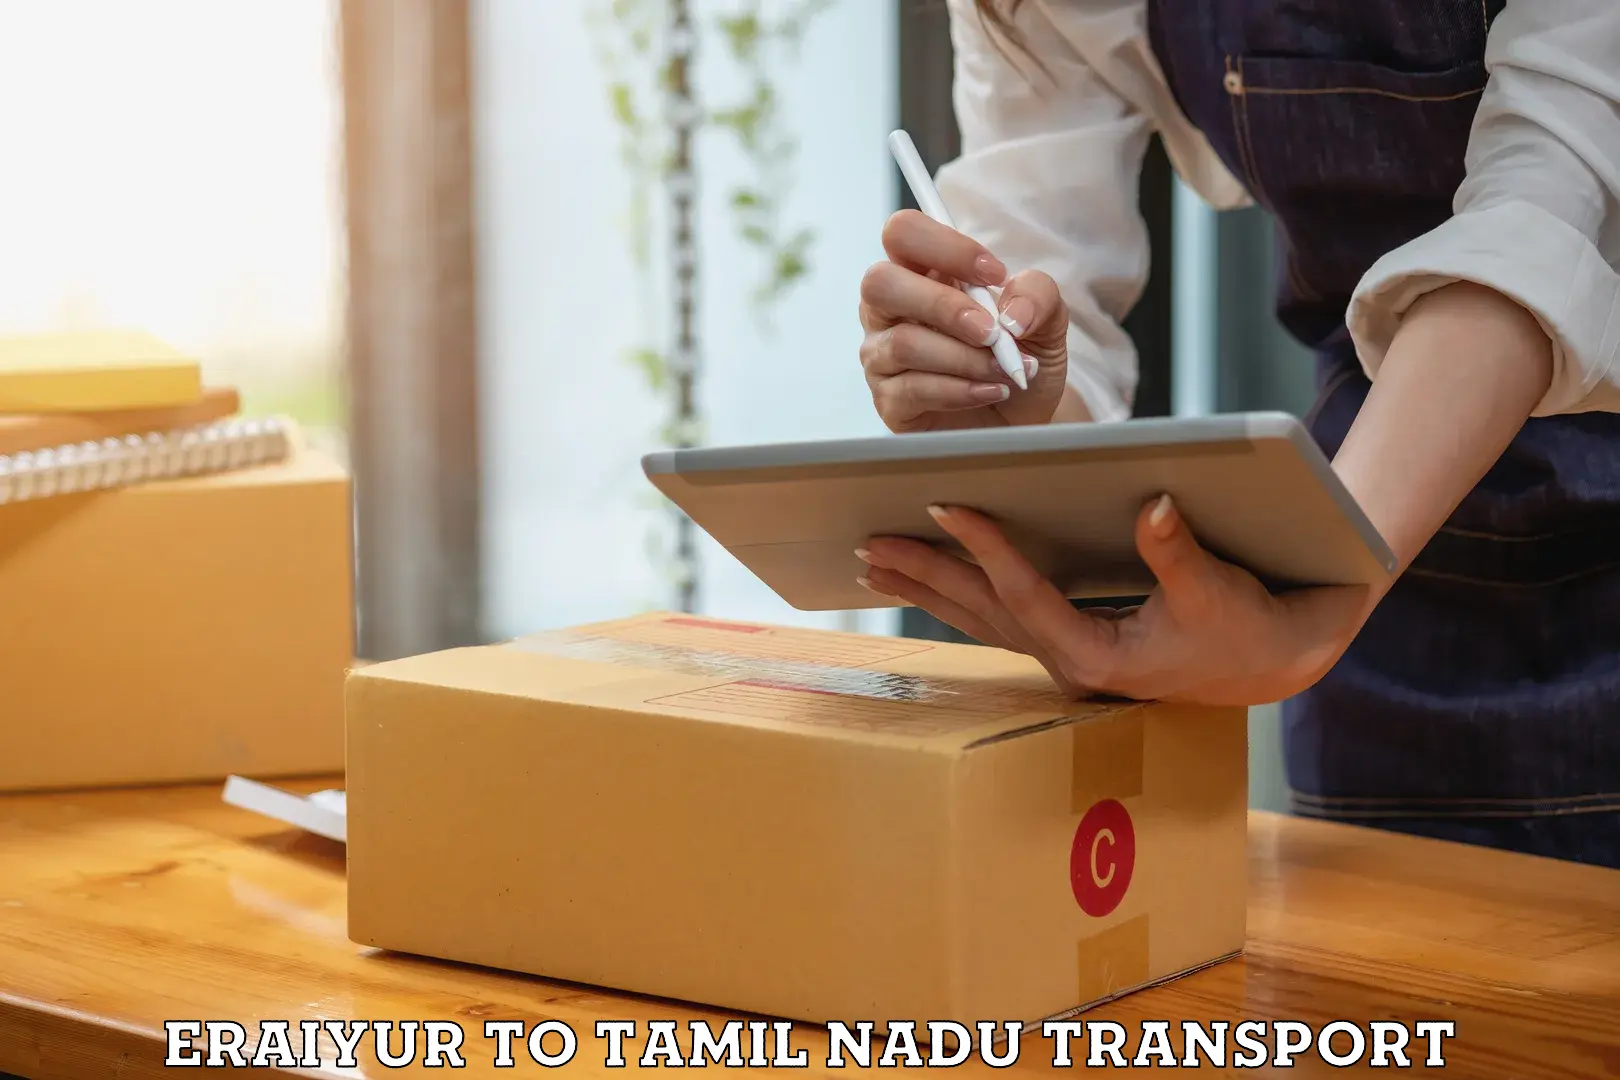 Nationwide transport services Eraiyur to SRM Institute of Science and Technology Chennai